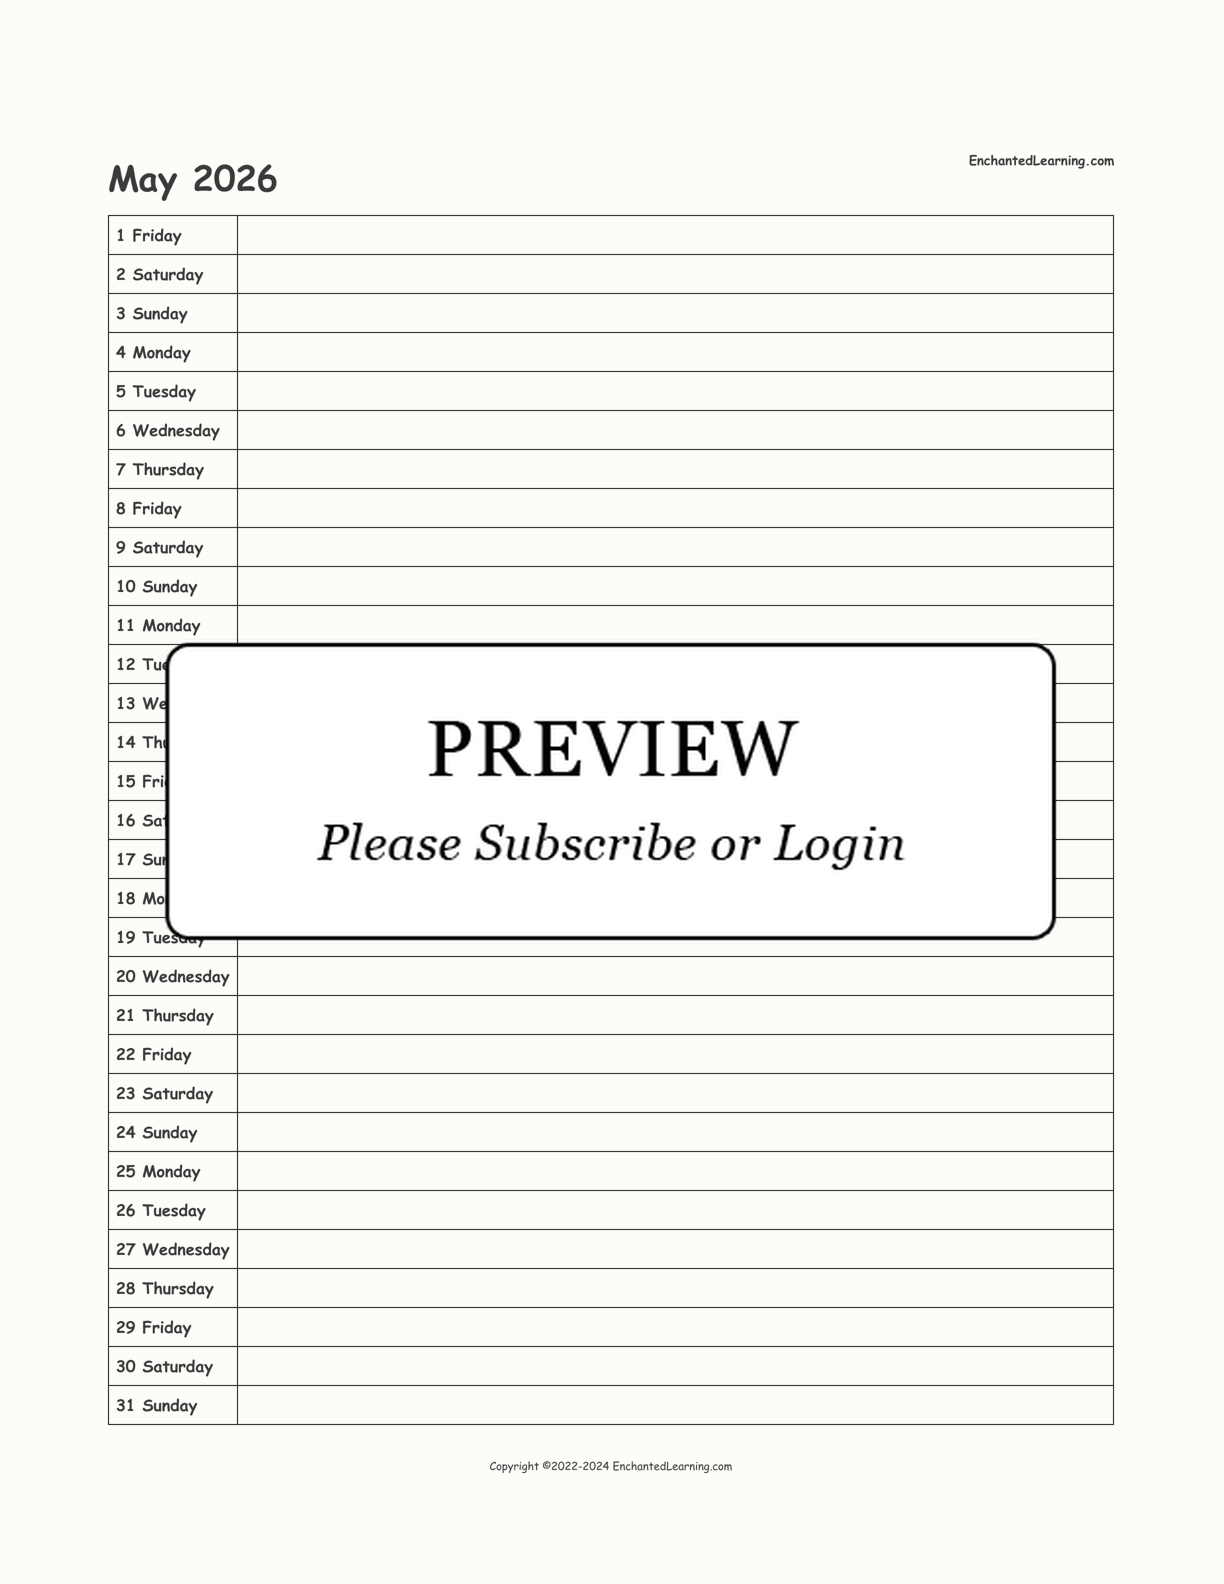 2026 Scheduling Calendar interactive printout page 5